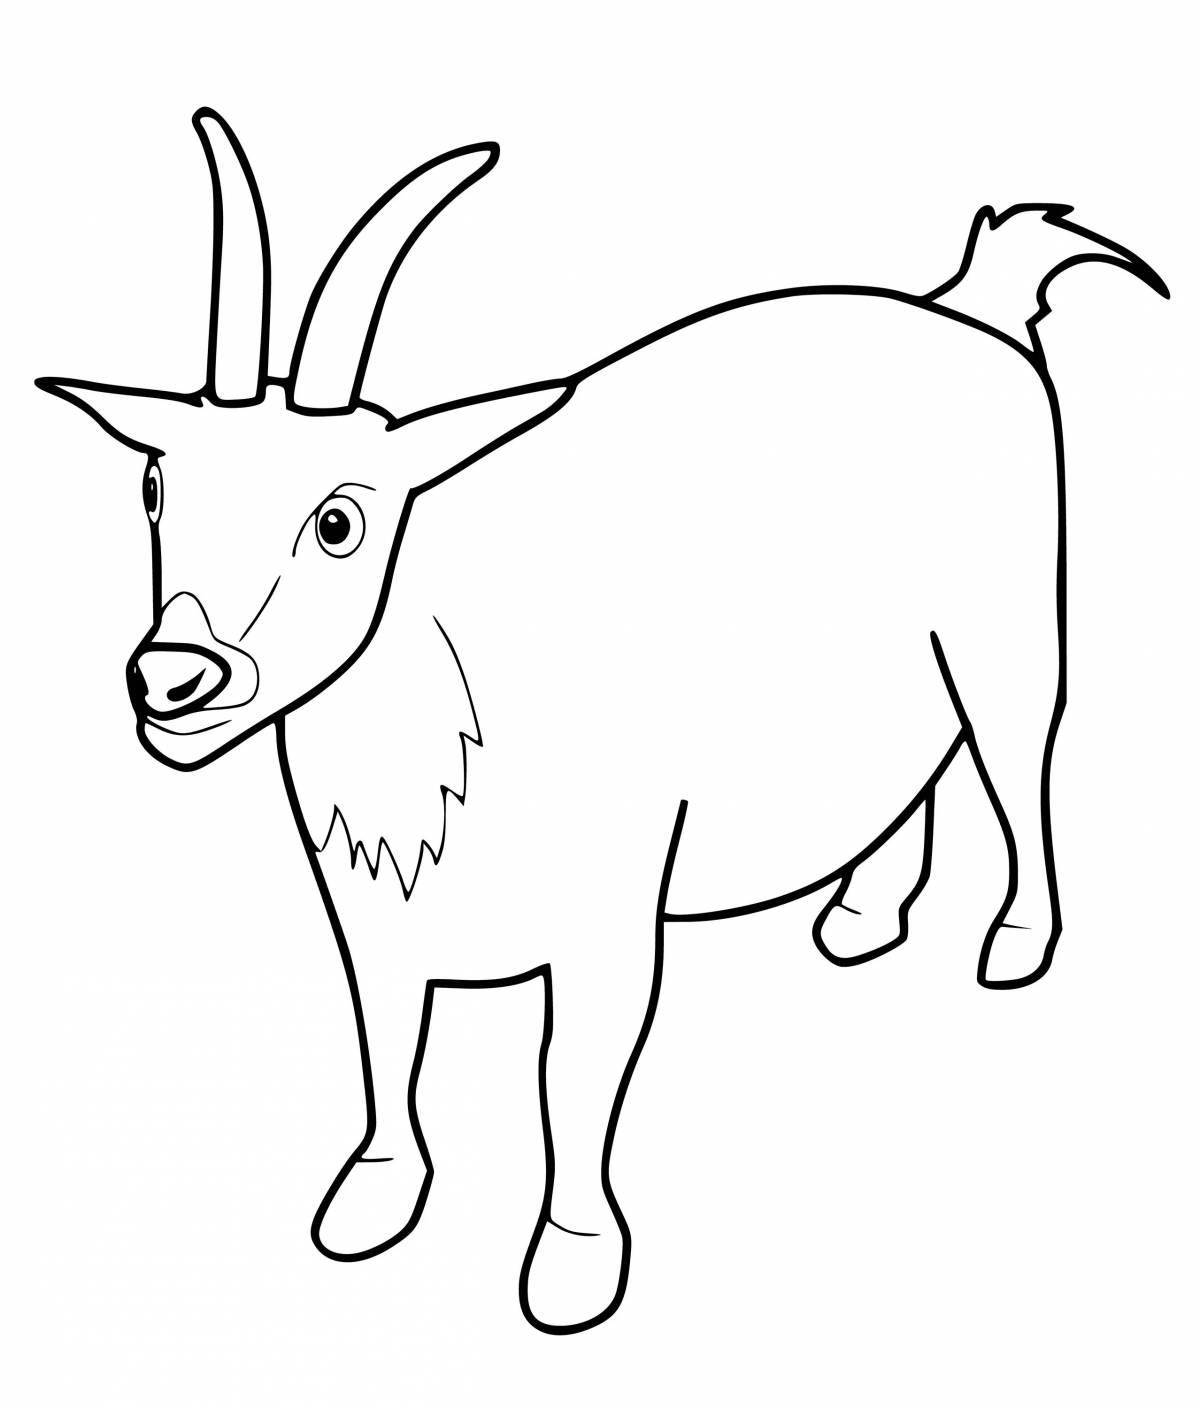 Animated goat coloring page for kids